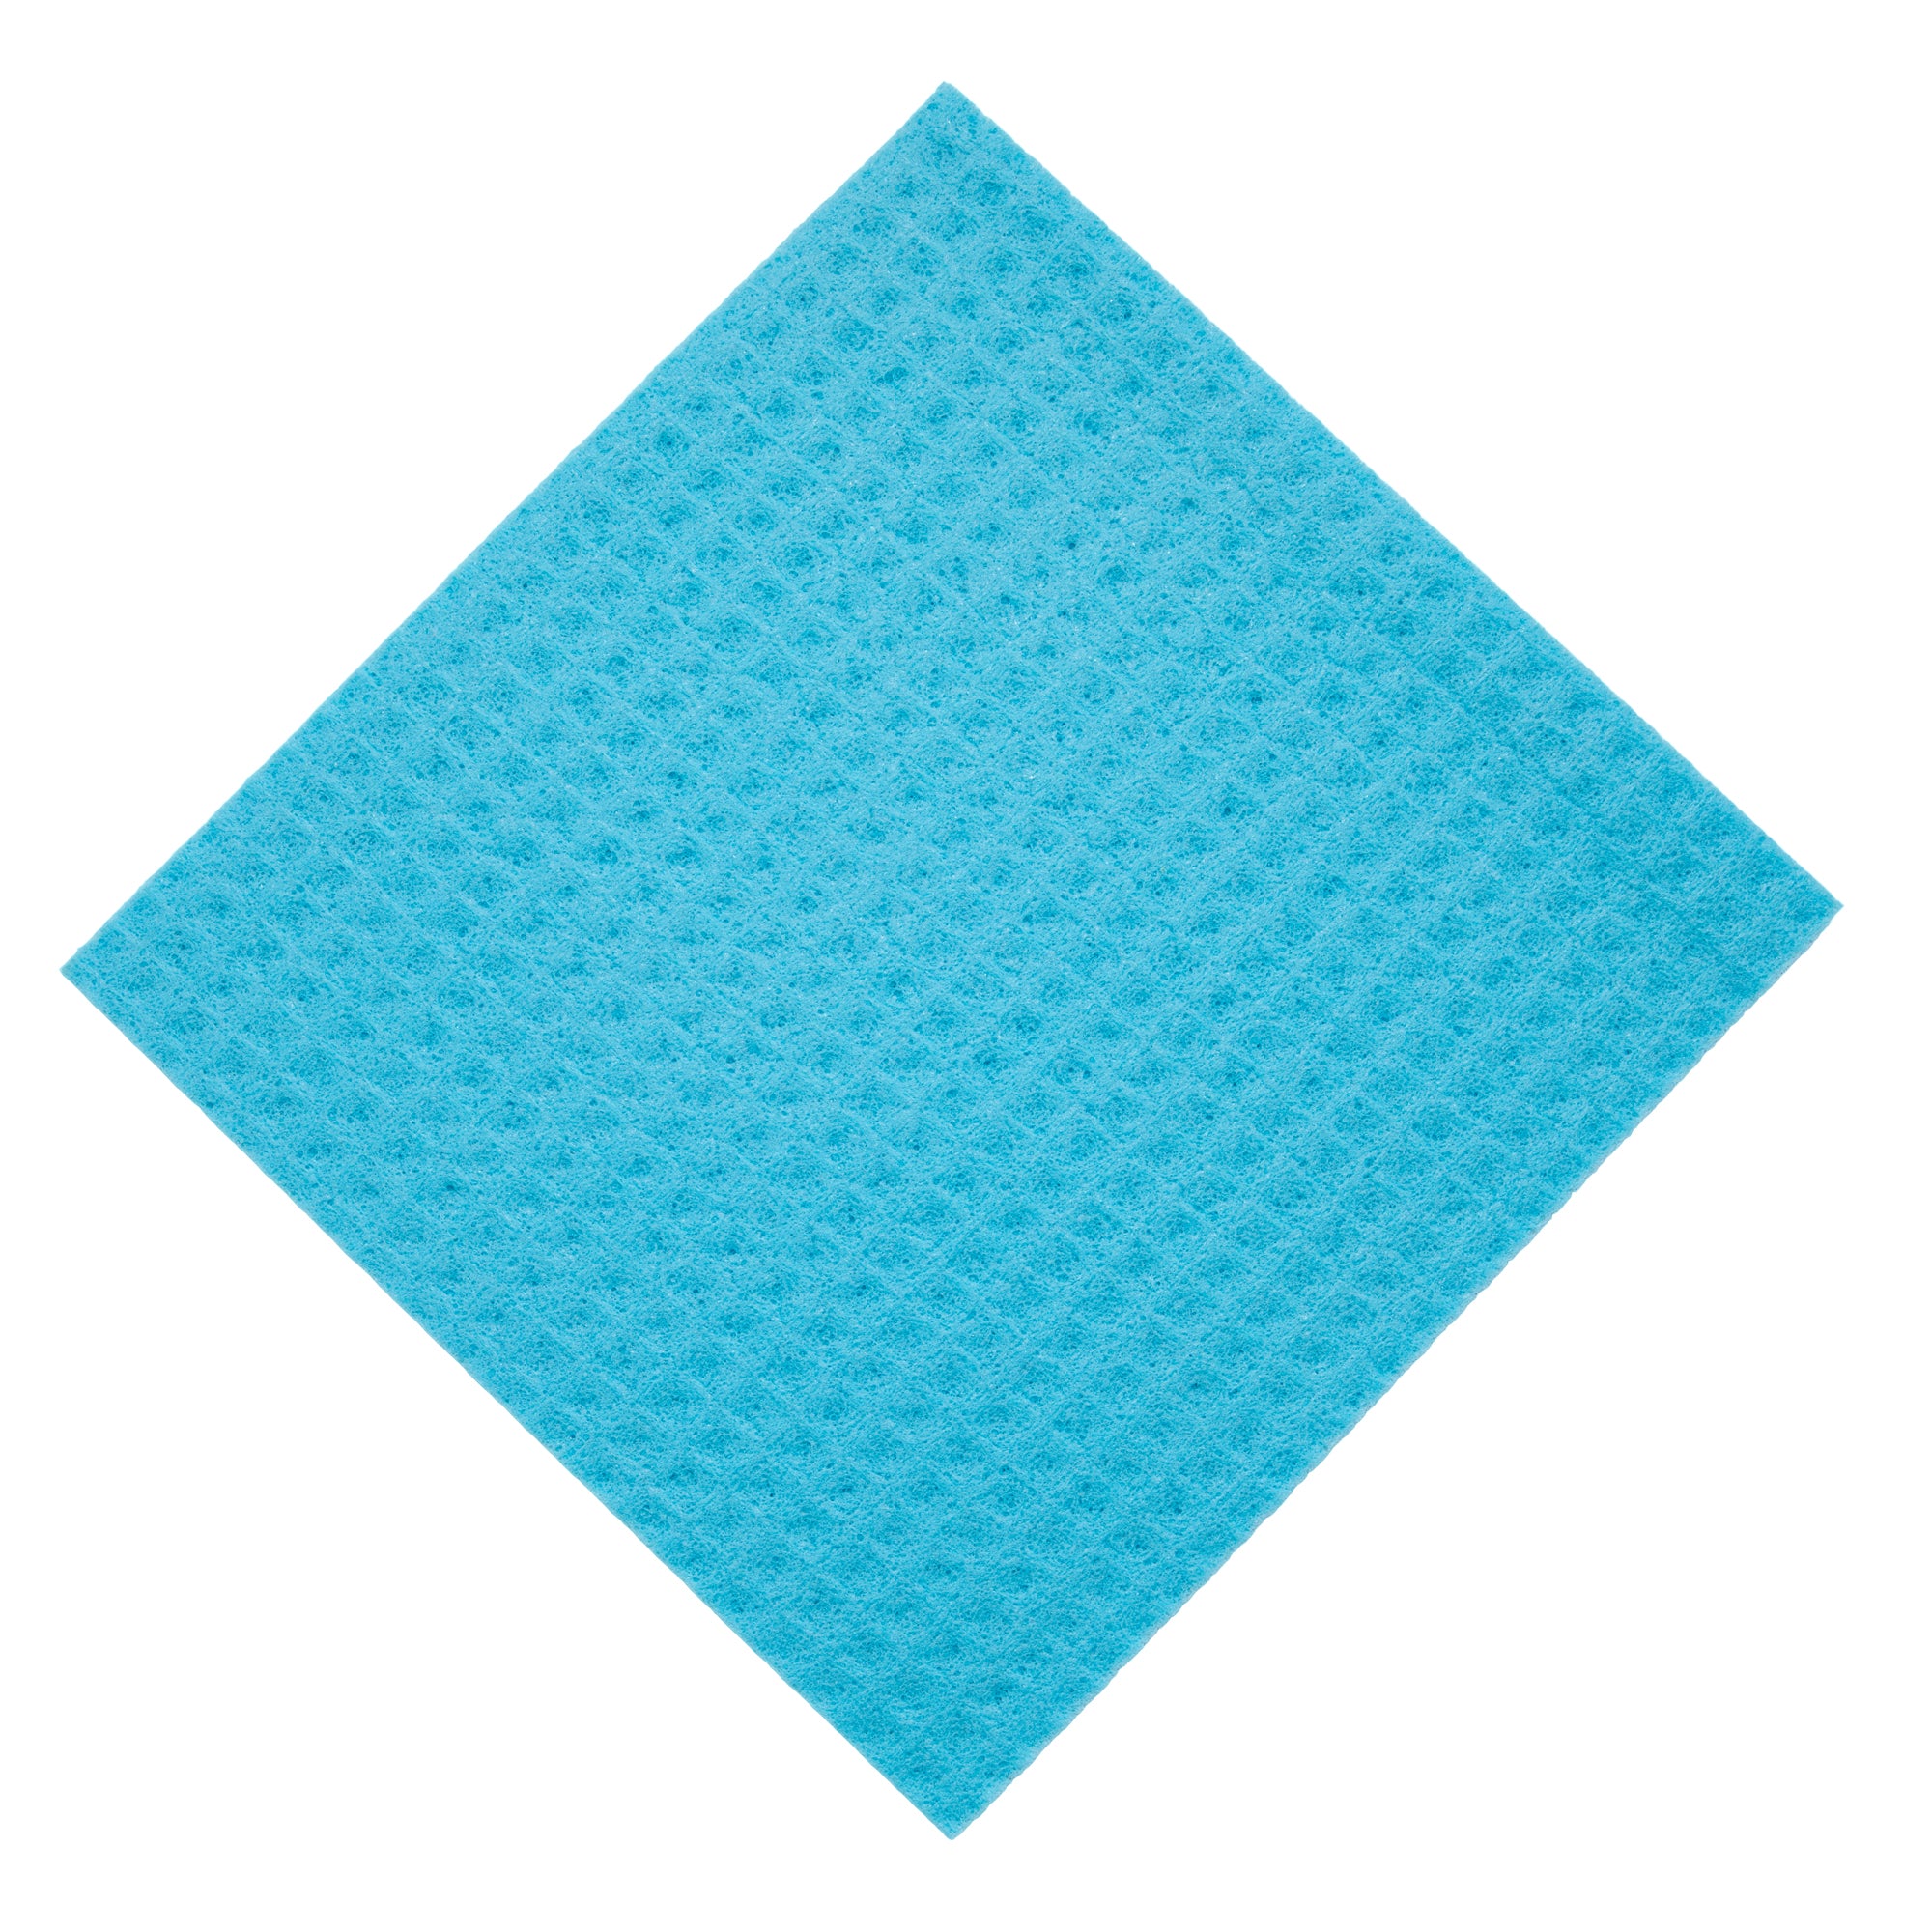 PaperlessKitchen Cleaning Cloth – Environmentally Friendly Cellulose Sponge Cloth and Paper Towel Alternative Is Washable, Reusable and Biodegradable